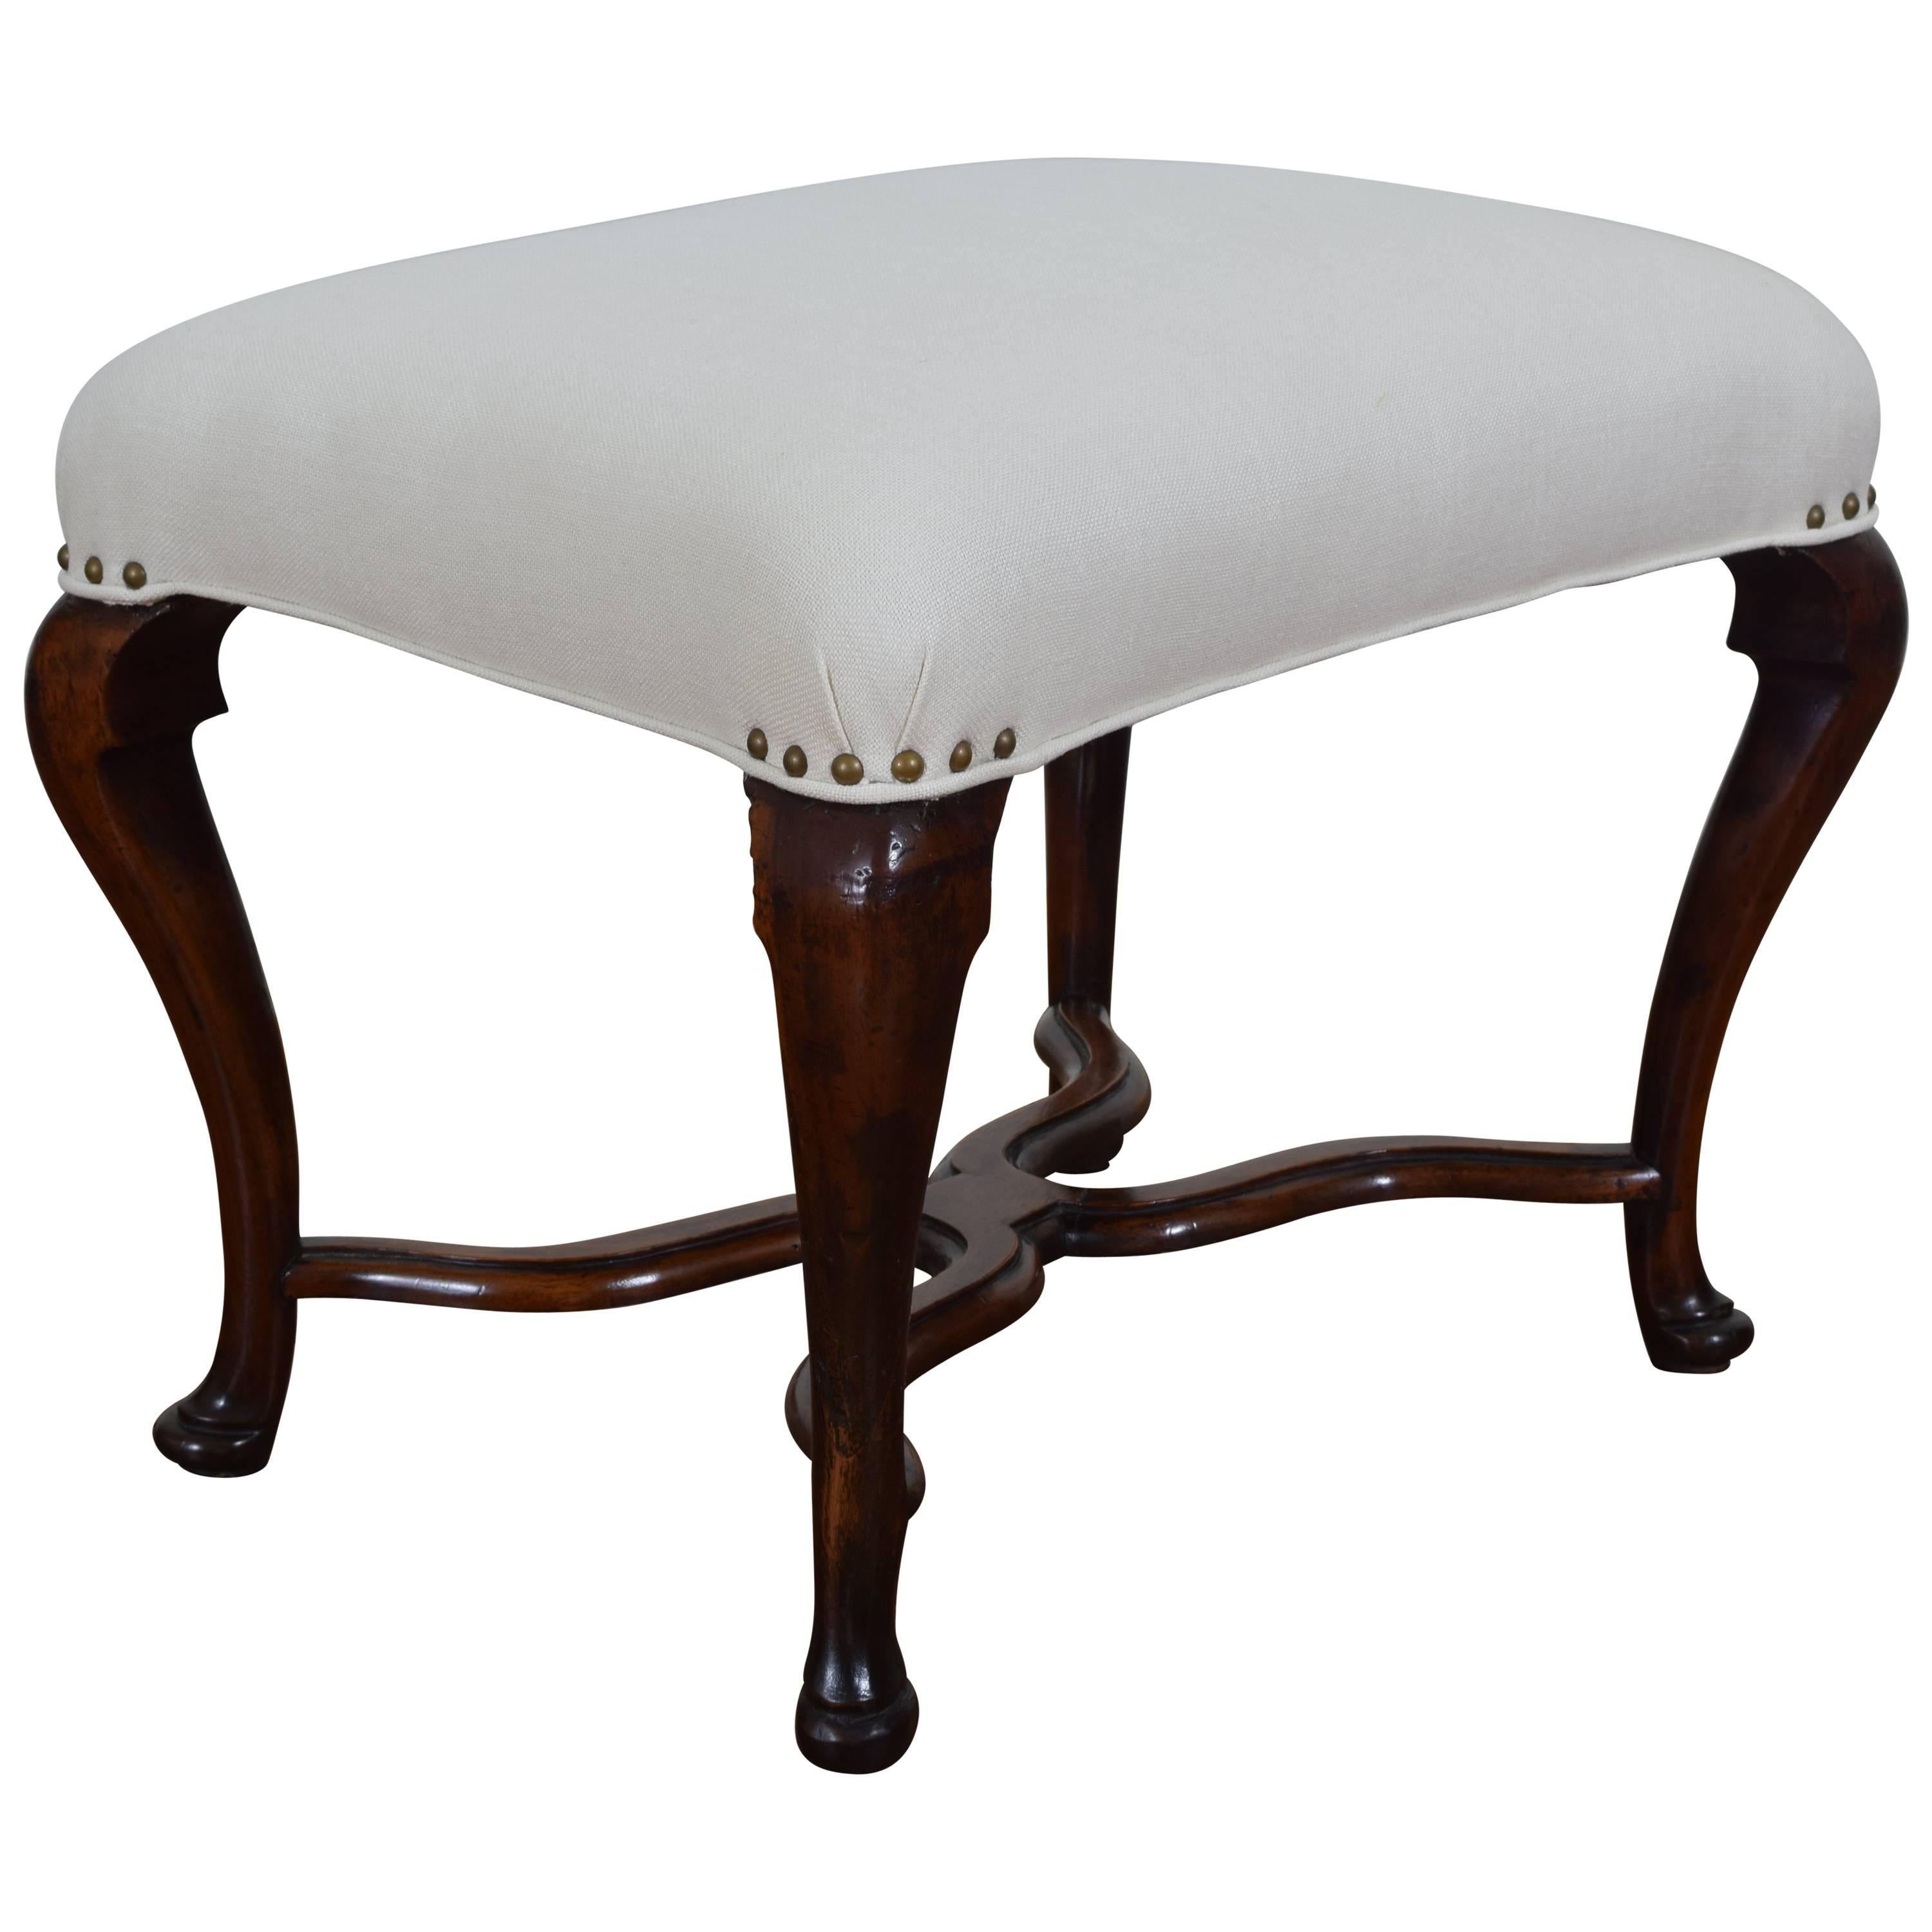 Italian Carved Walnut Footstool or Bench in the Queen Anne Style, 18th Century